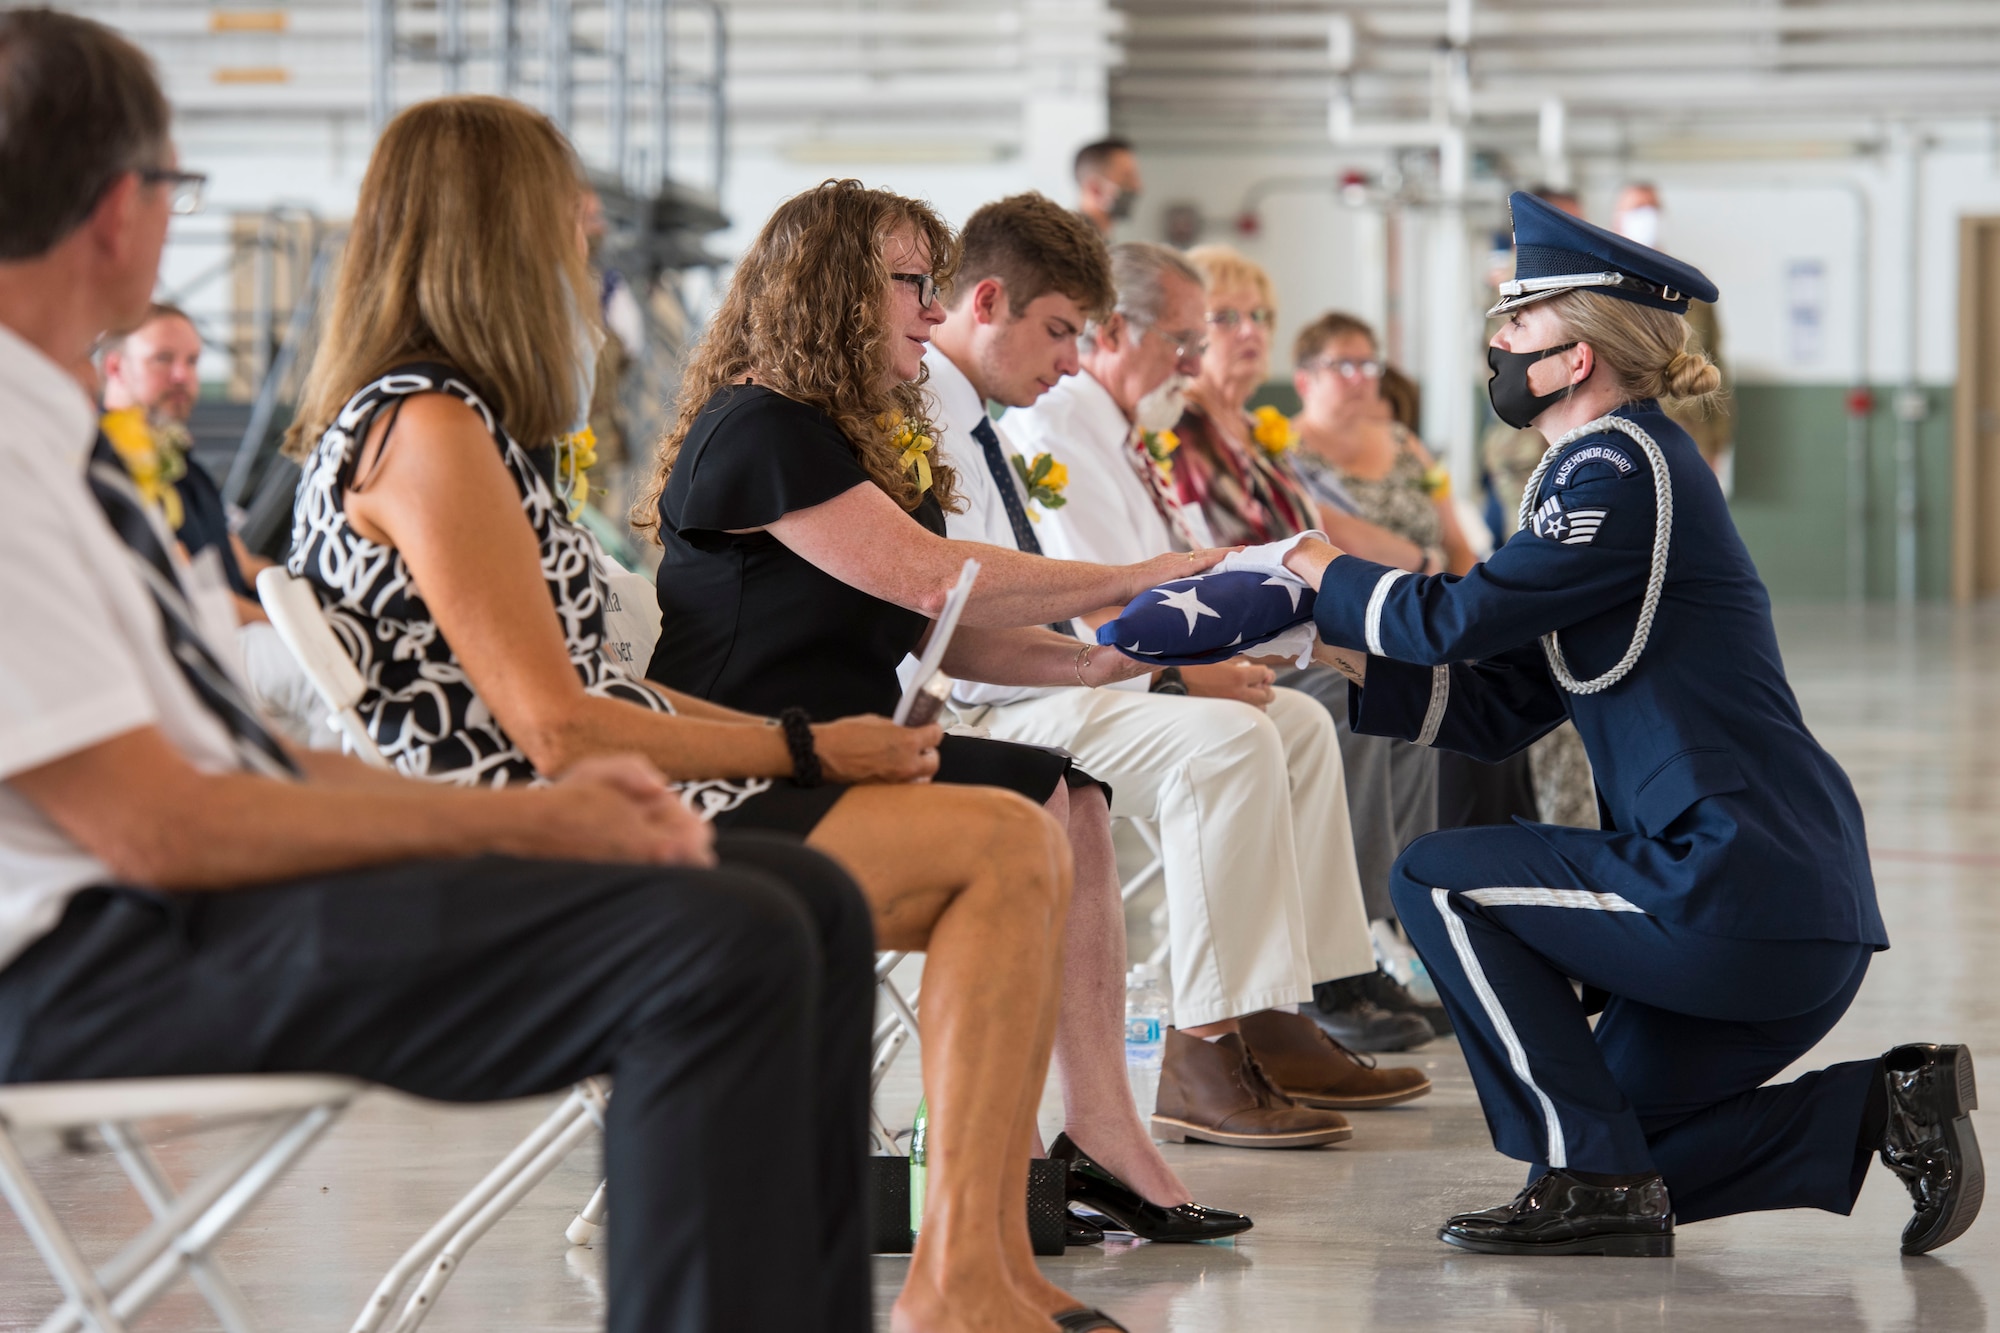 Staff Sgt. Kayla Hoffmaster, 167th Airlift Wing honor guard member, presents an American flag to Mrs. Donna Nasser during the memorial service for Lt. Col. Chris Nasser held at the 167th Airlift Wing, Aug. 2. Nasser wife Donna, and son Colin, were presented with Lt. Col. Nasser’s Meritorious Service Medal, West Virginia Legion of Merit and a shadowbox representing his 30 year military career.